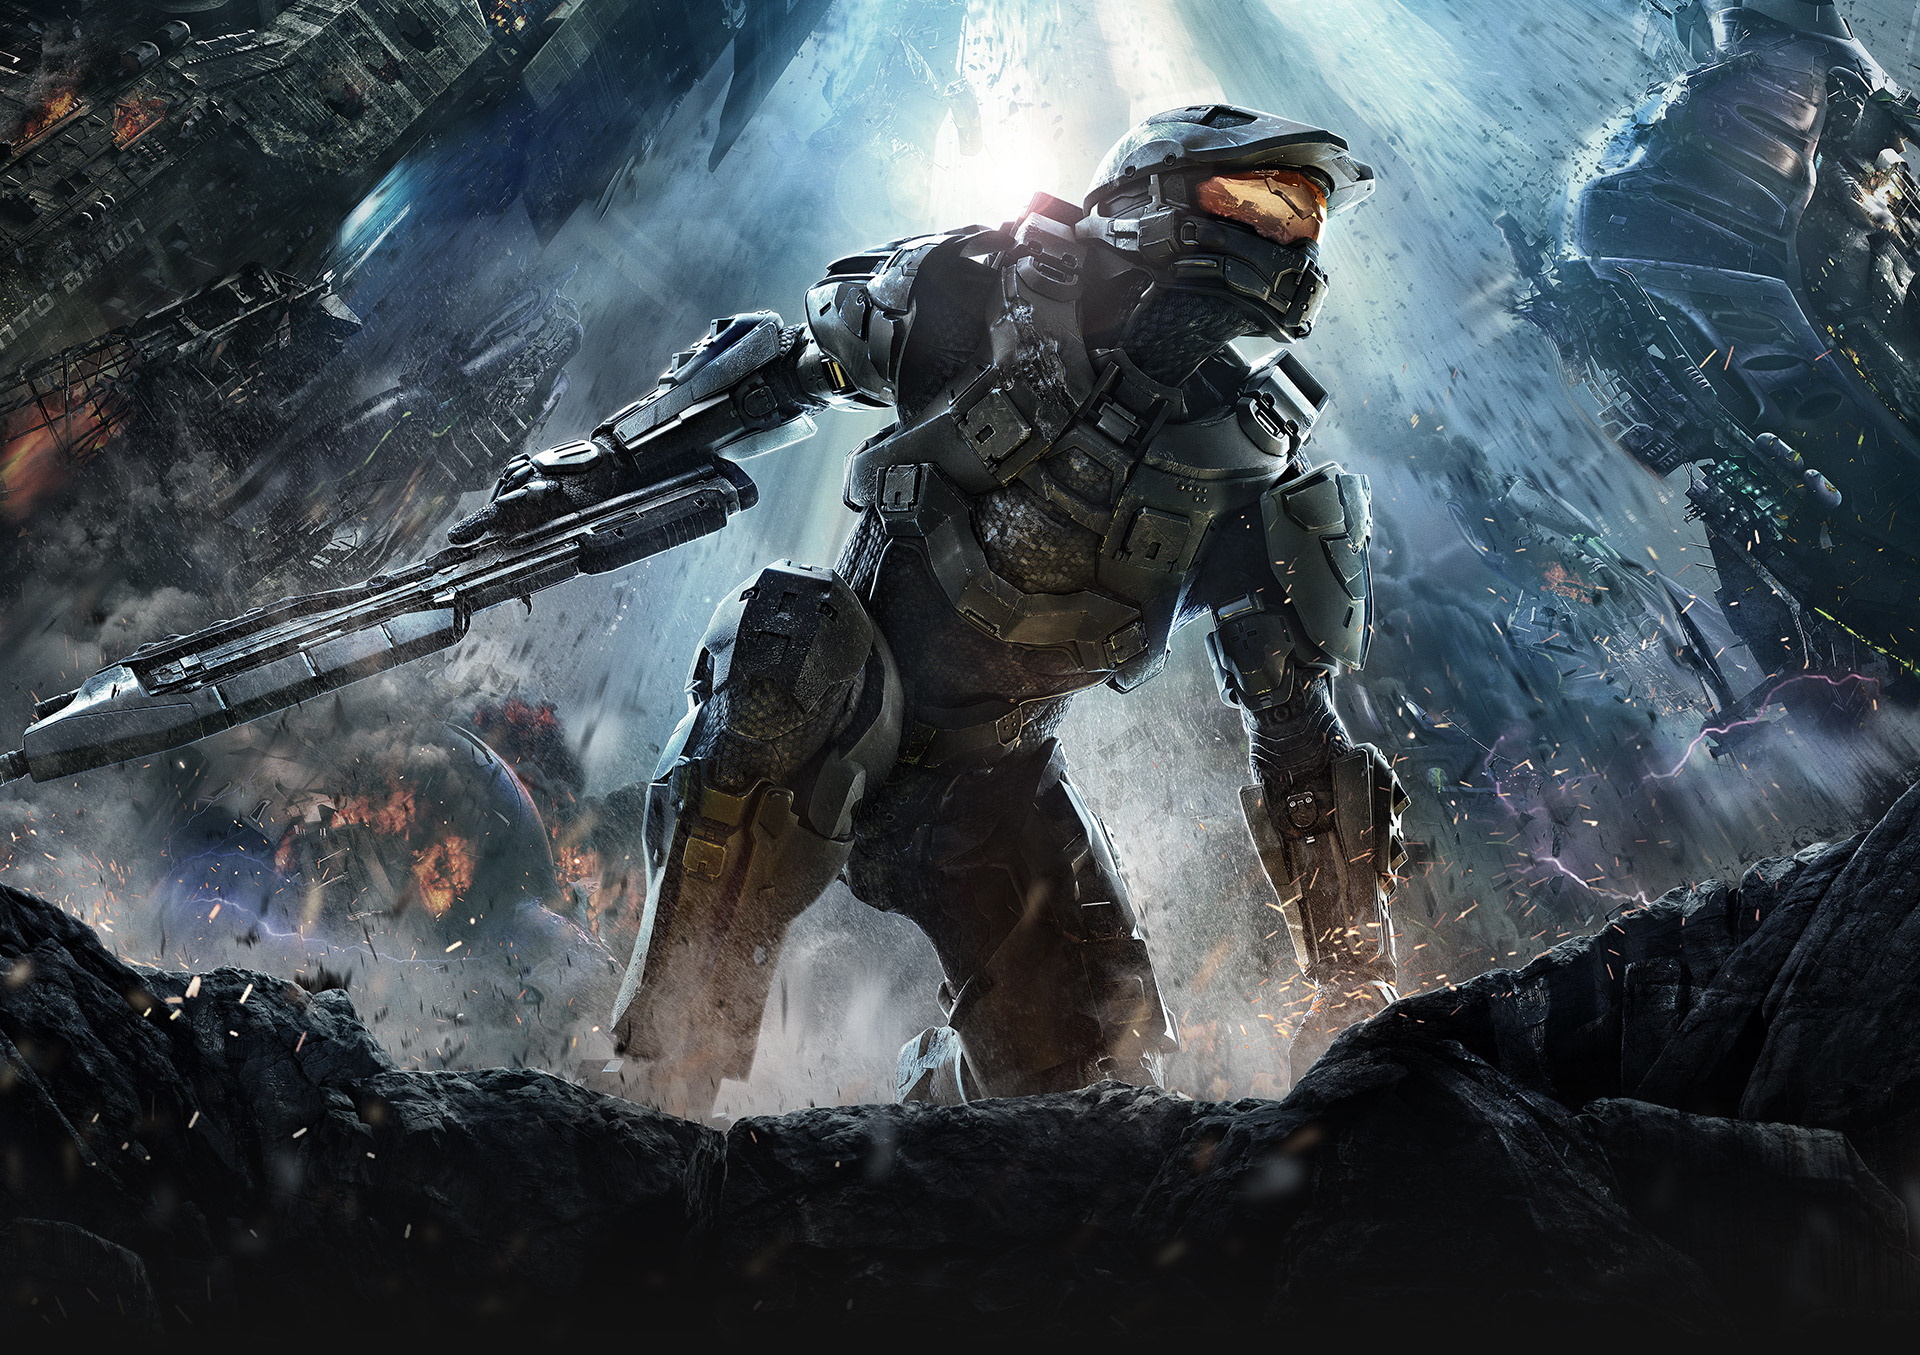 Image of Master Chief from halo